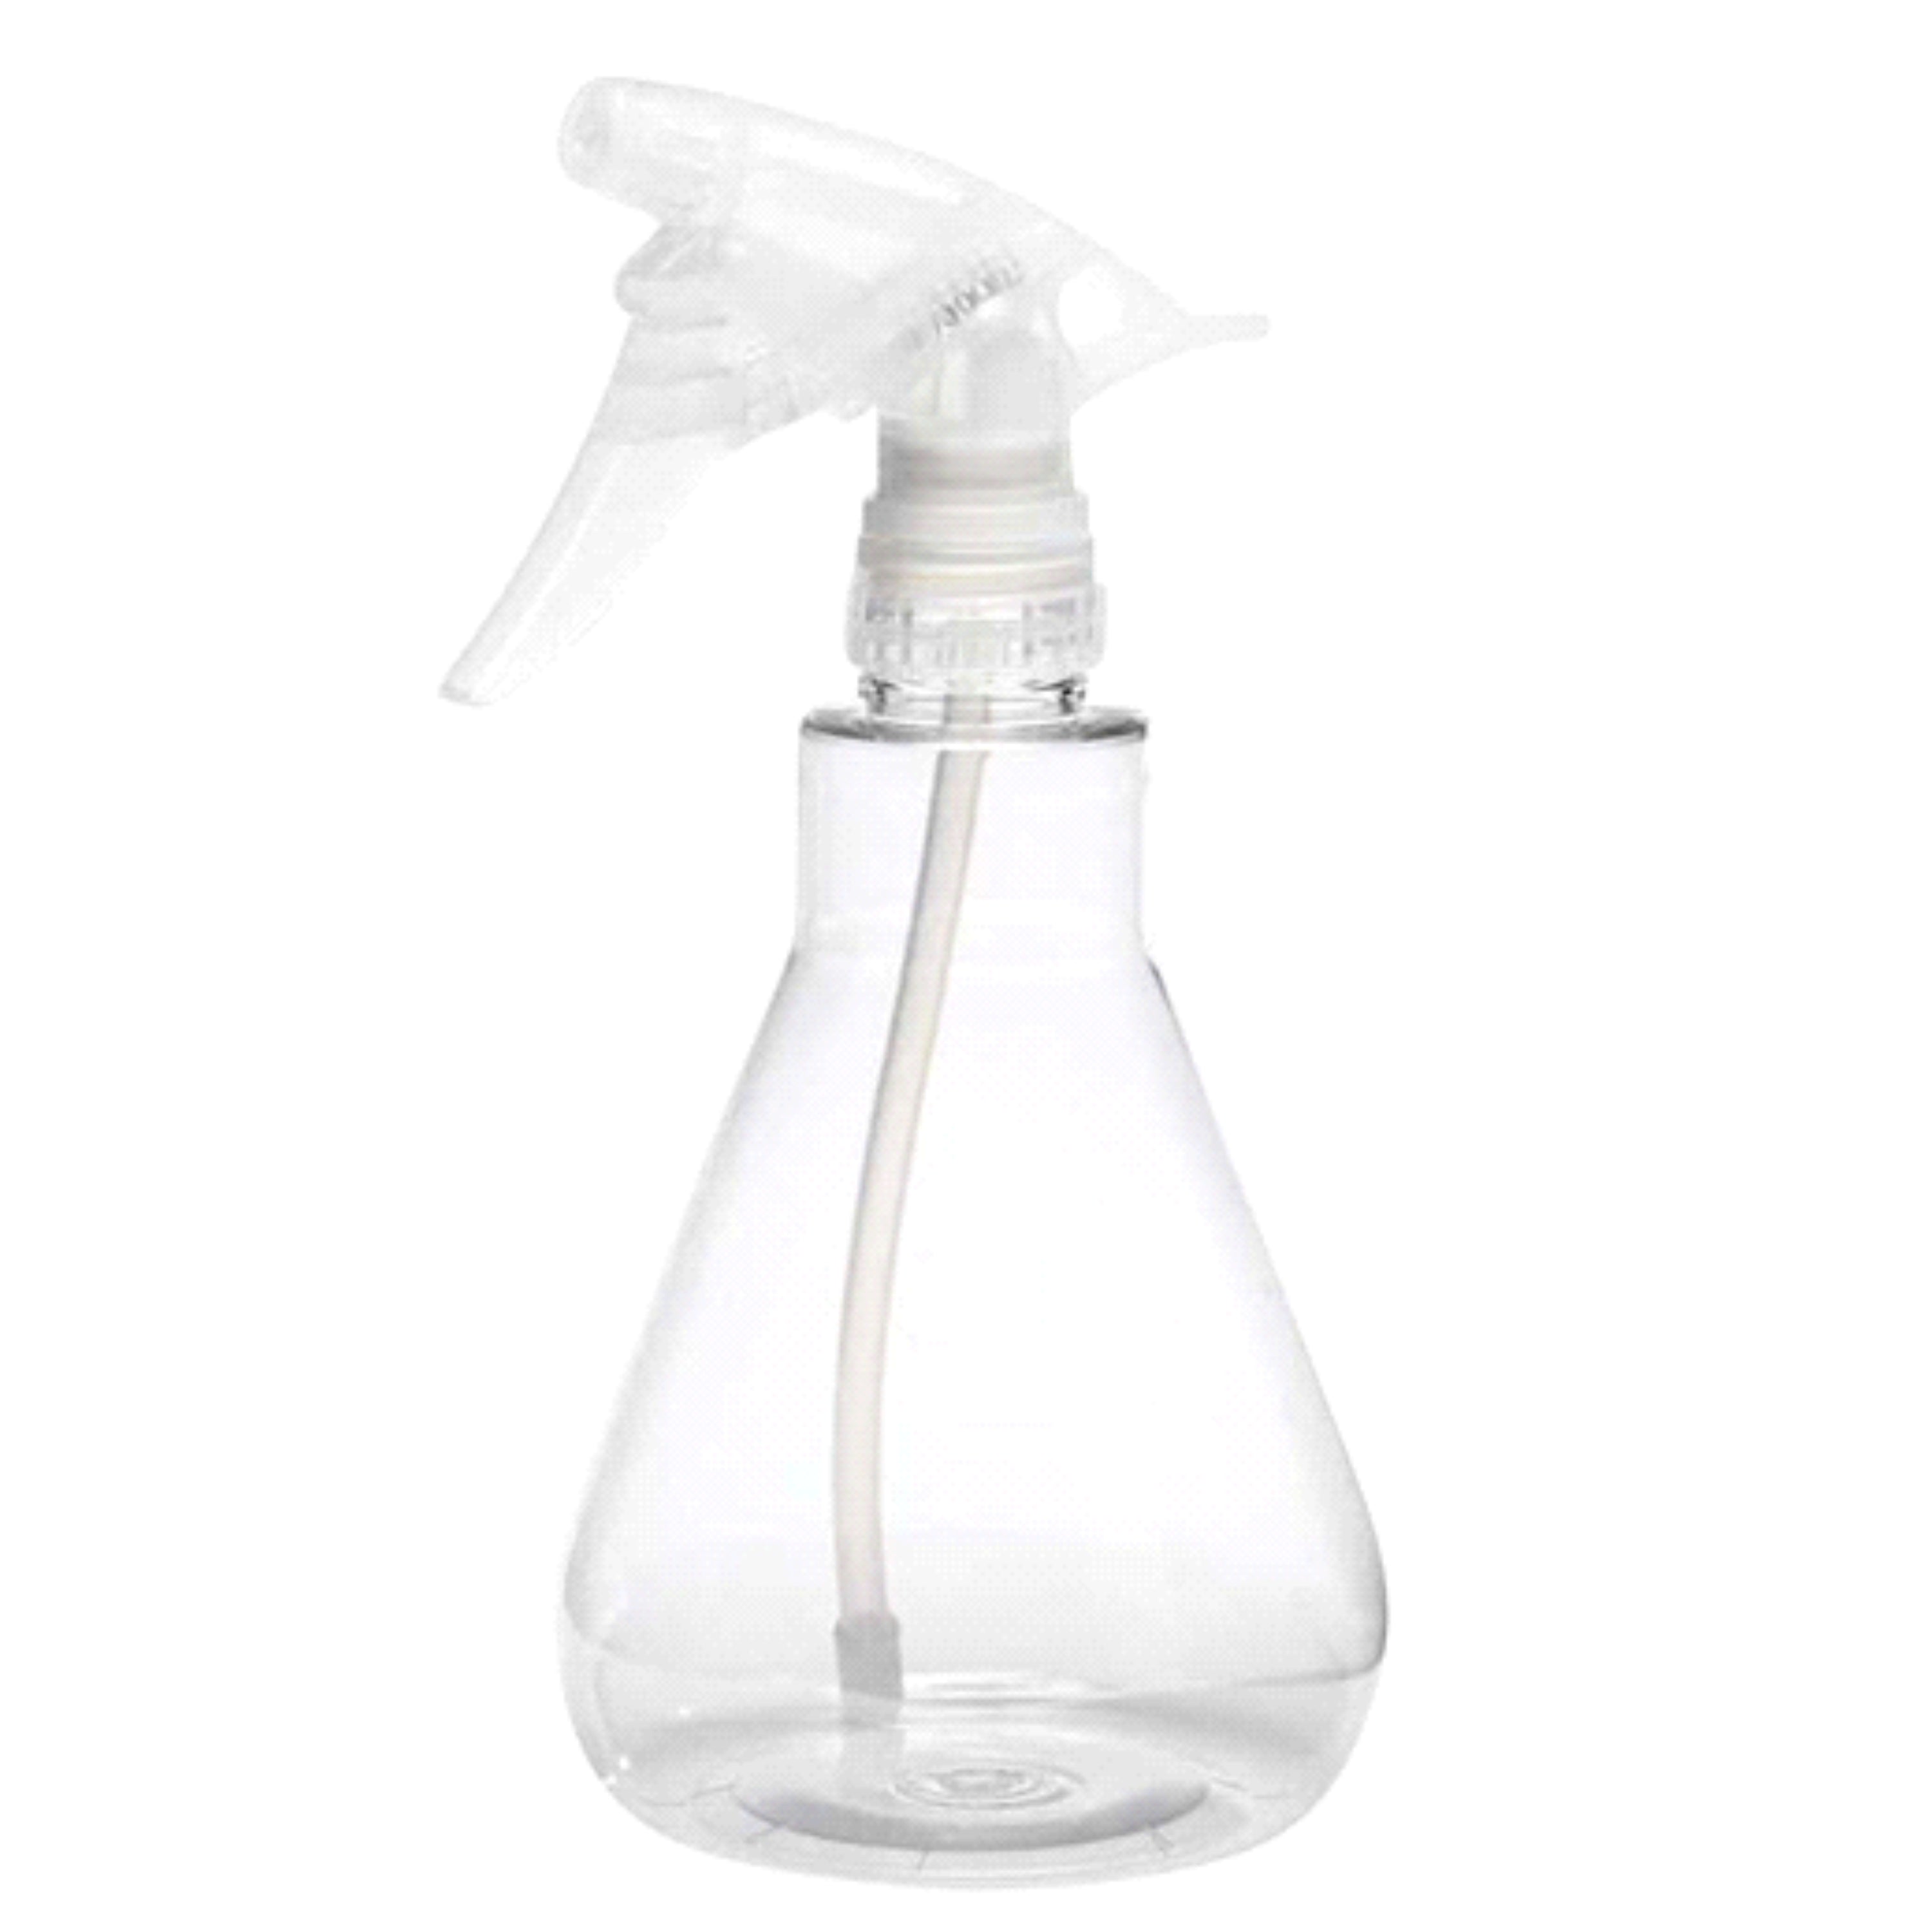 Cleaning Spray Bottle – 16 oz.